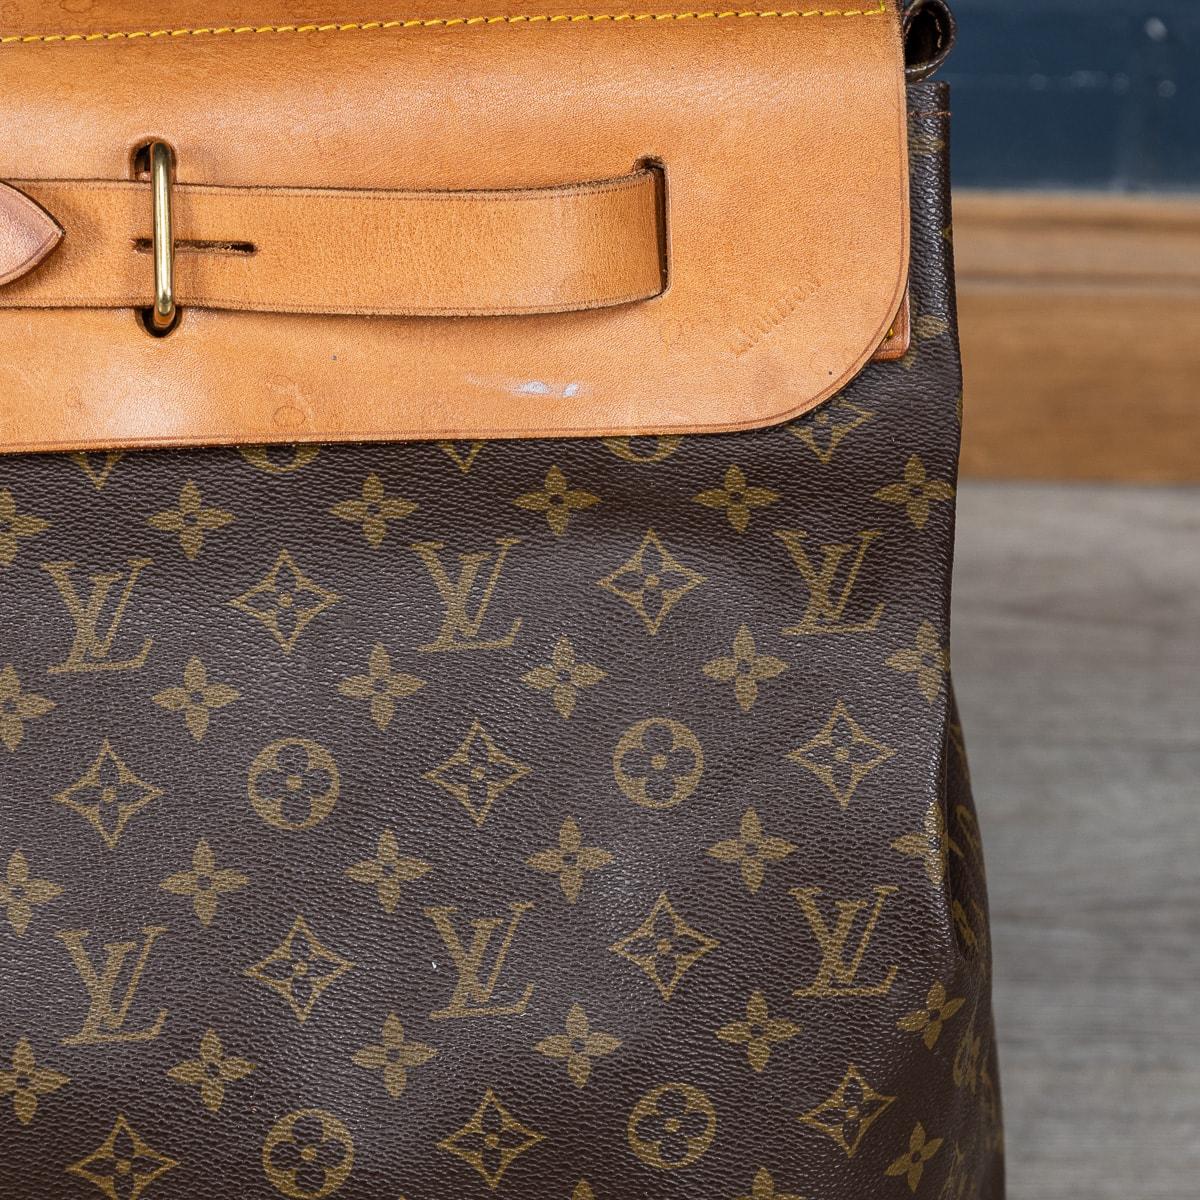 20th Century Louis Vuitton Steamer Bag In Monogram Canvas, Made In France For Sale 6